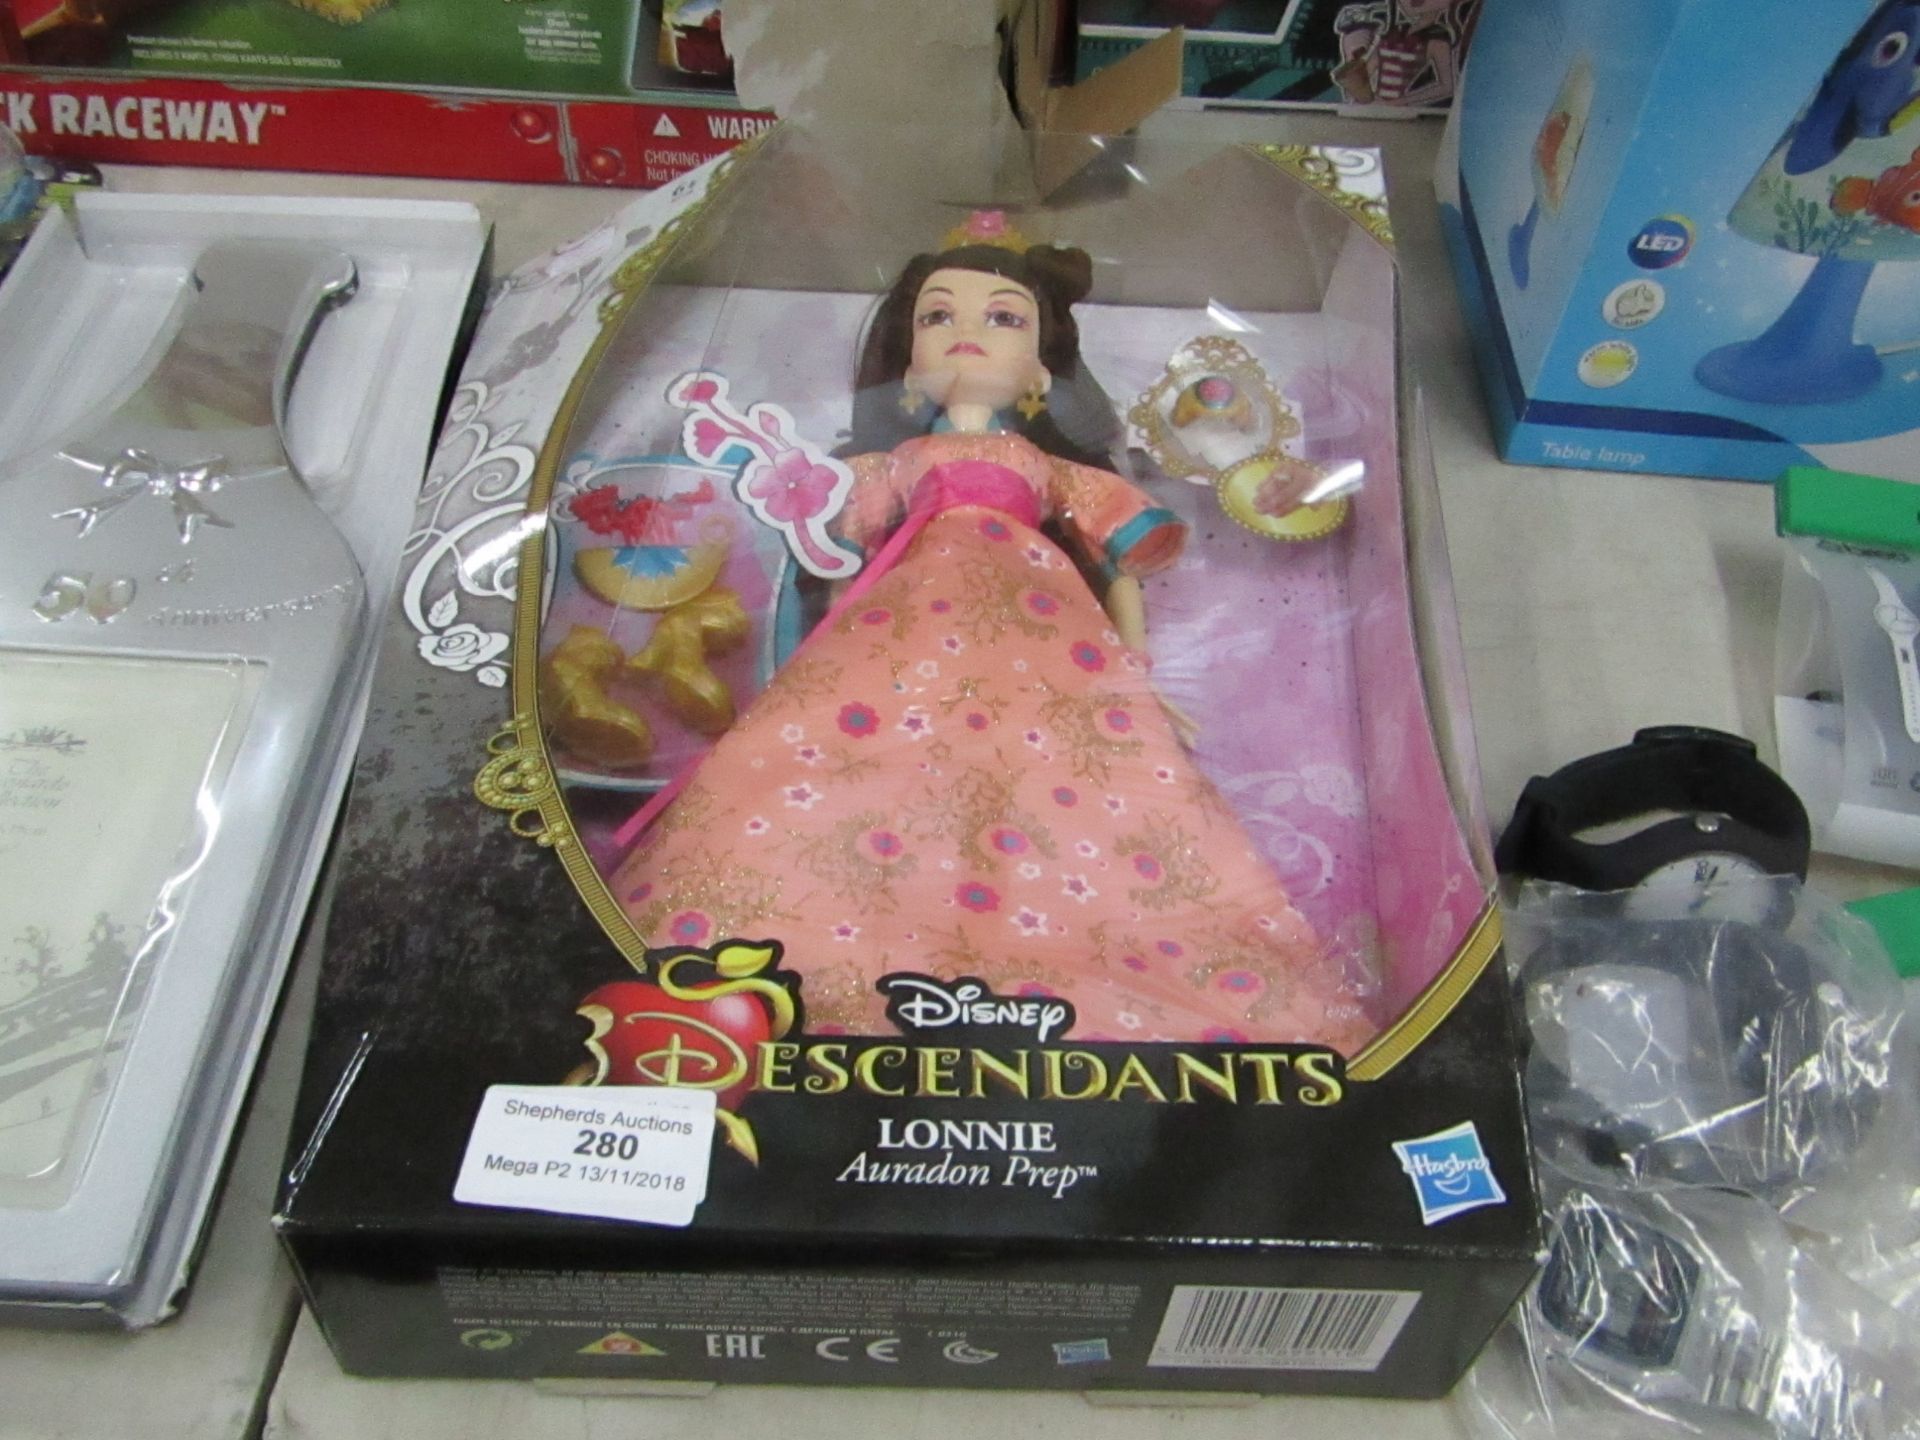 Disney descendants lonnie doll, new and boxed.